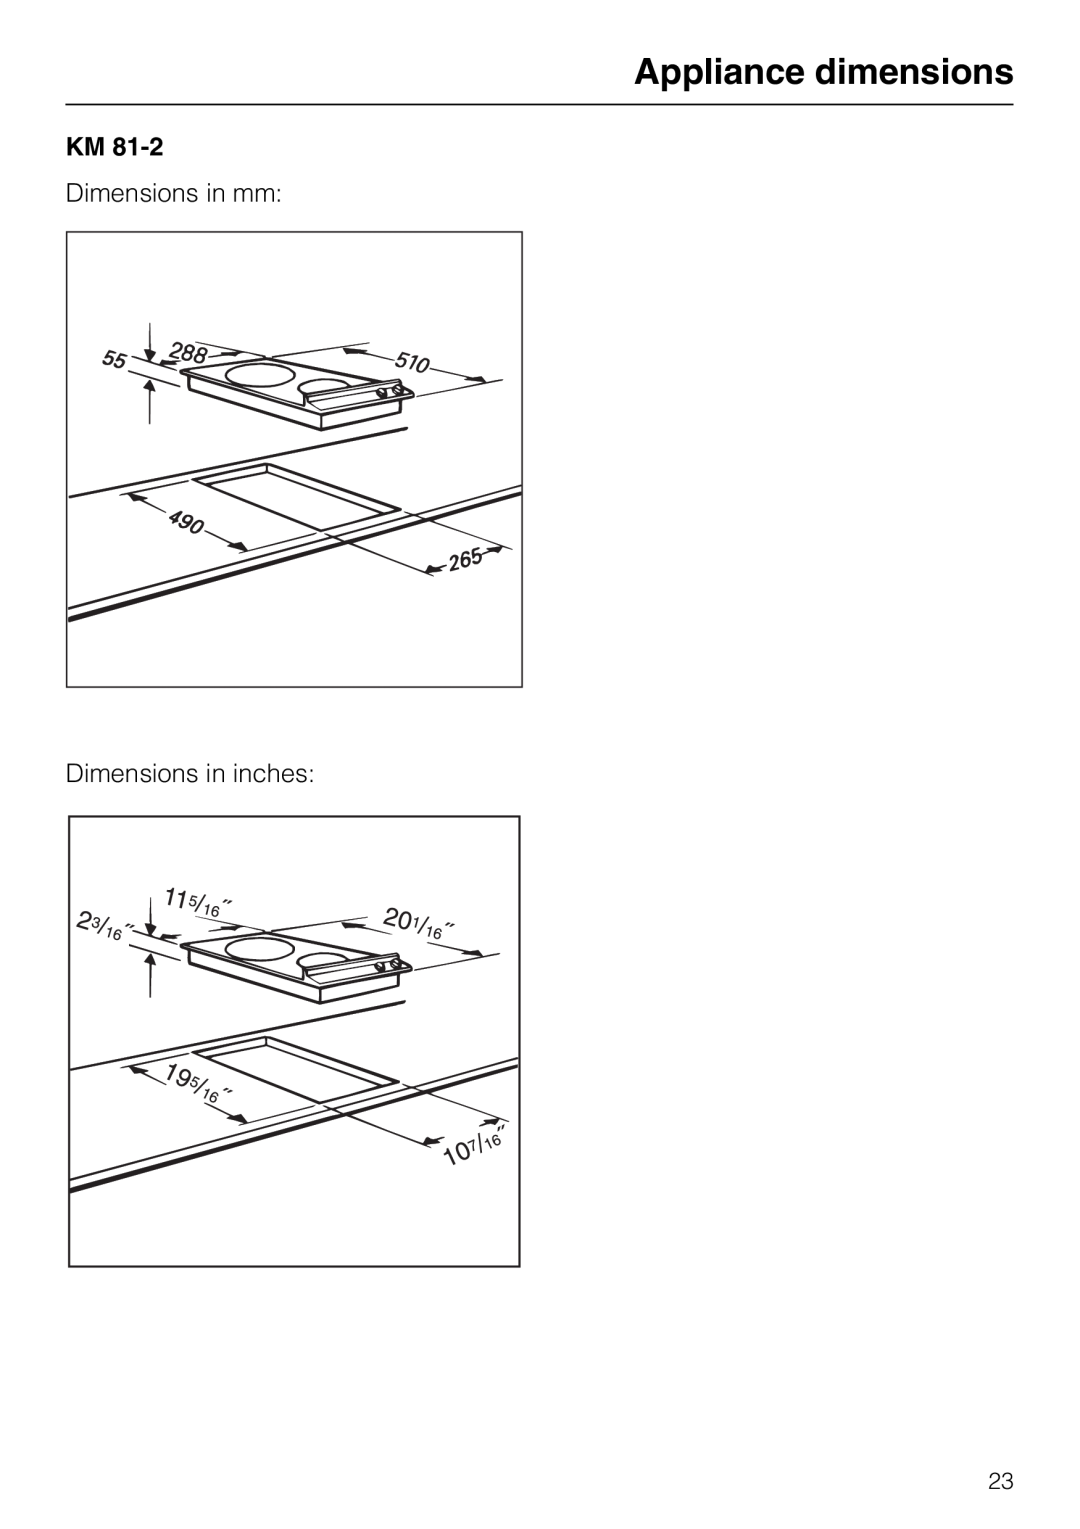 Miele KM 81-2 operating instructions Appliance dimensions, Dimensions in mm Dimensions in inches 